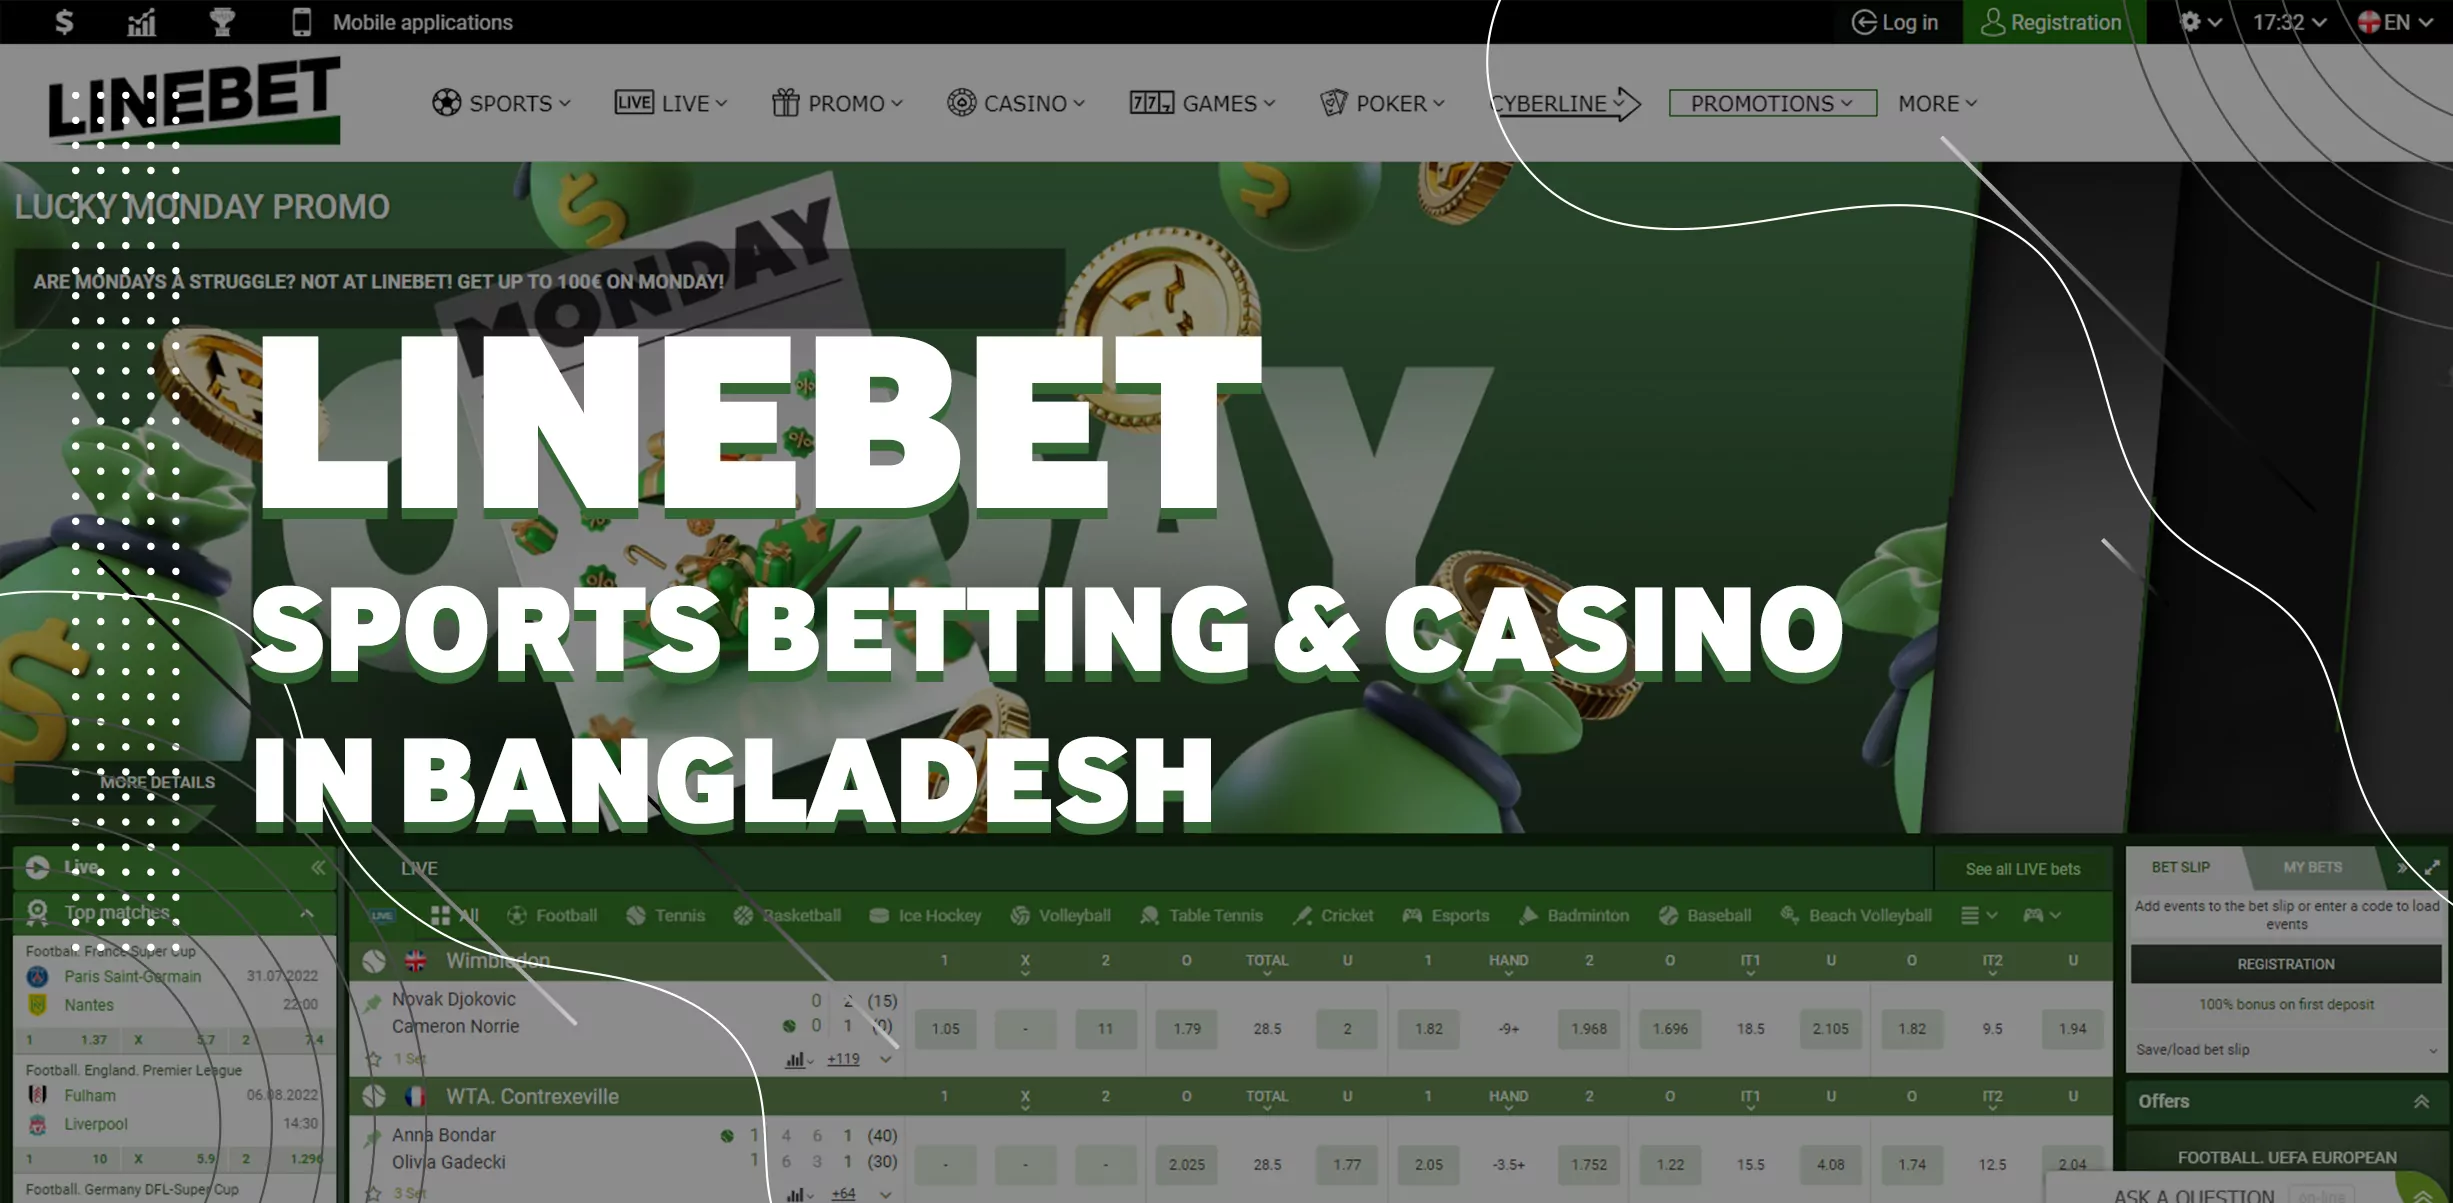 linebet sports betting and casino site in bangladesh